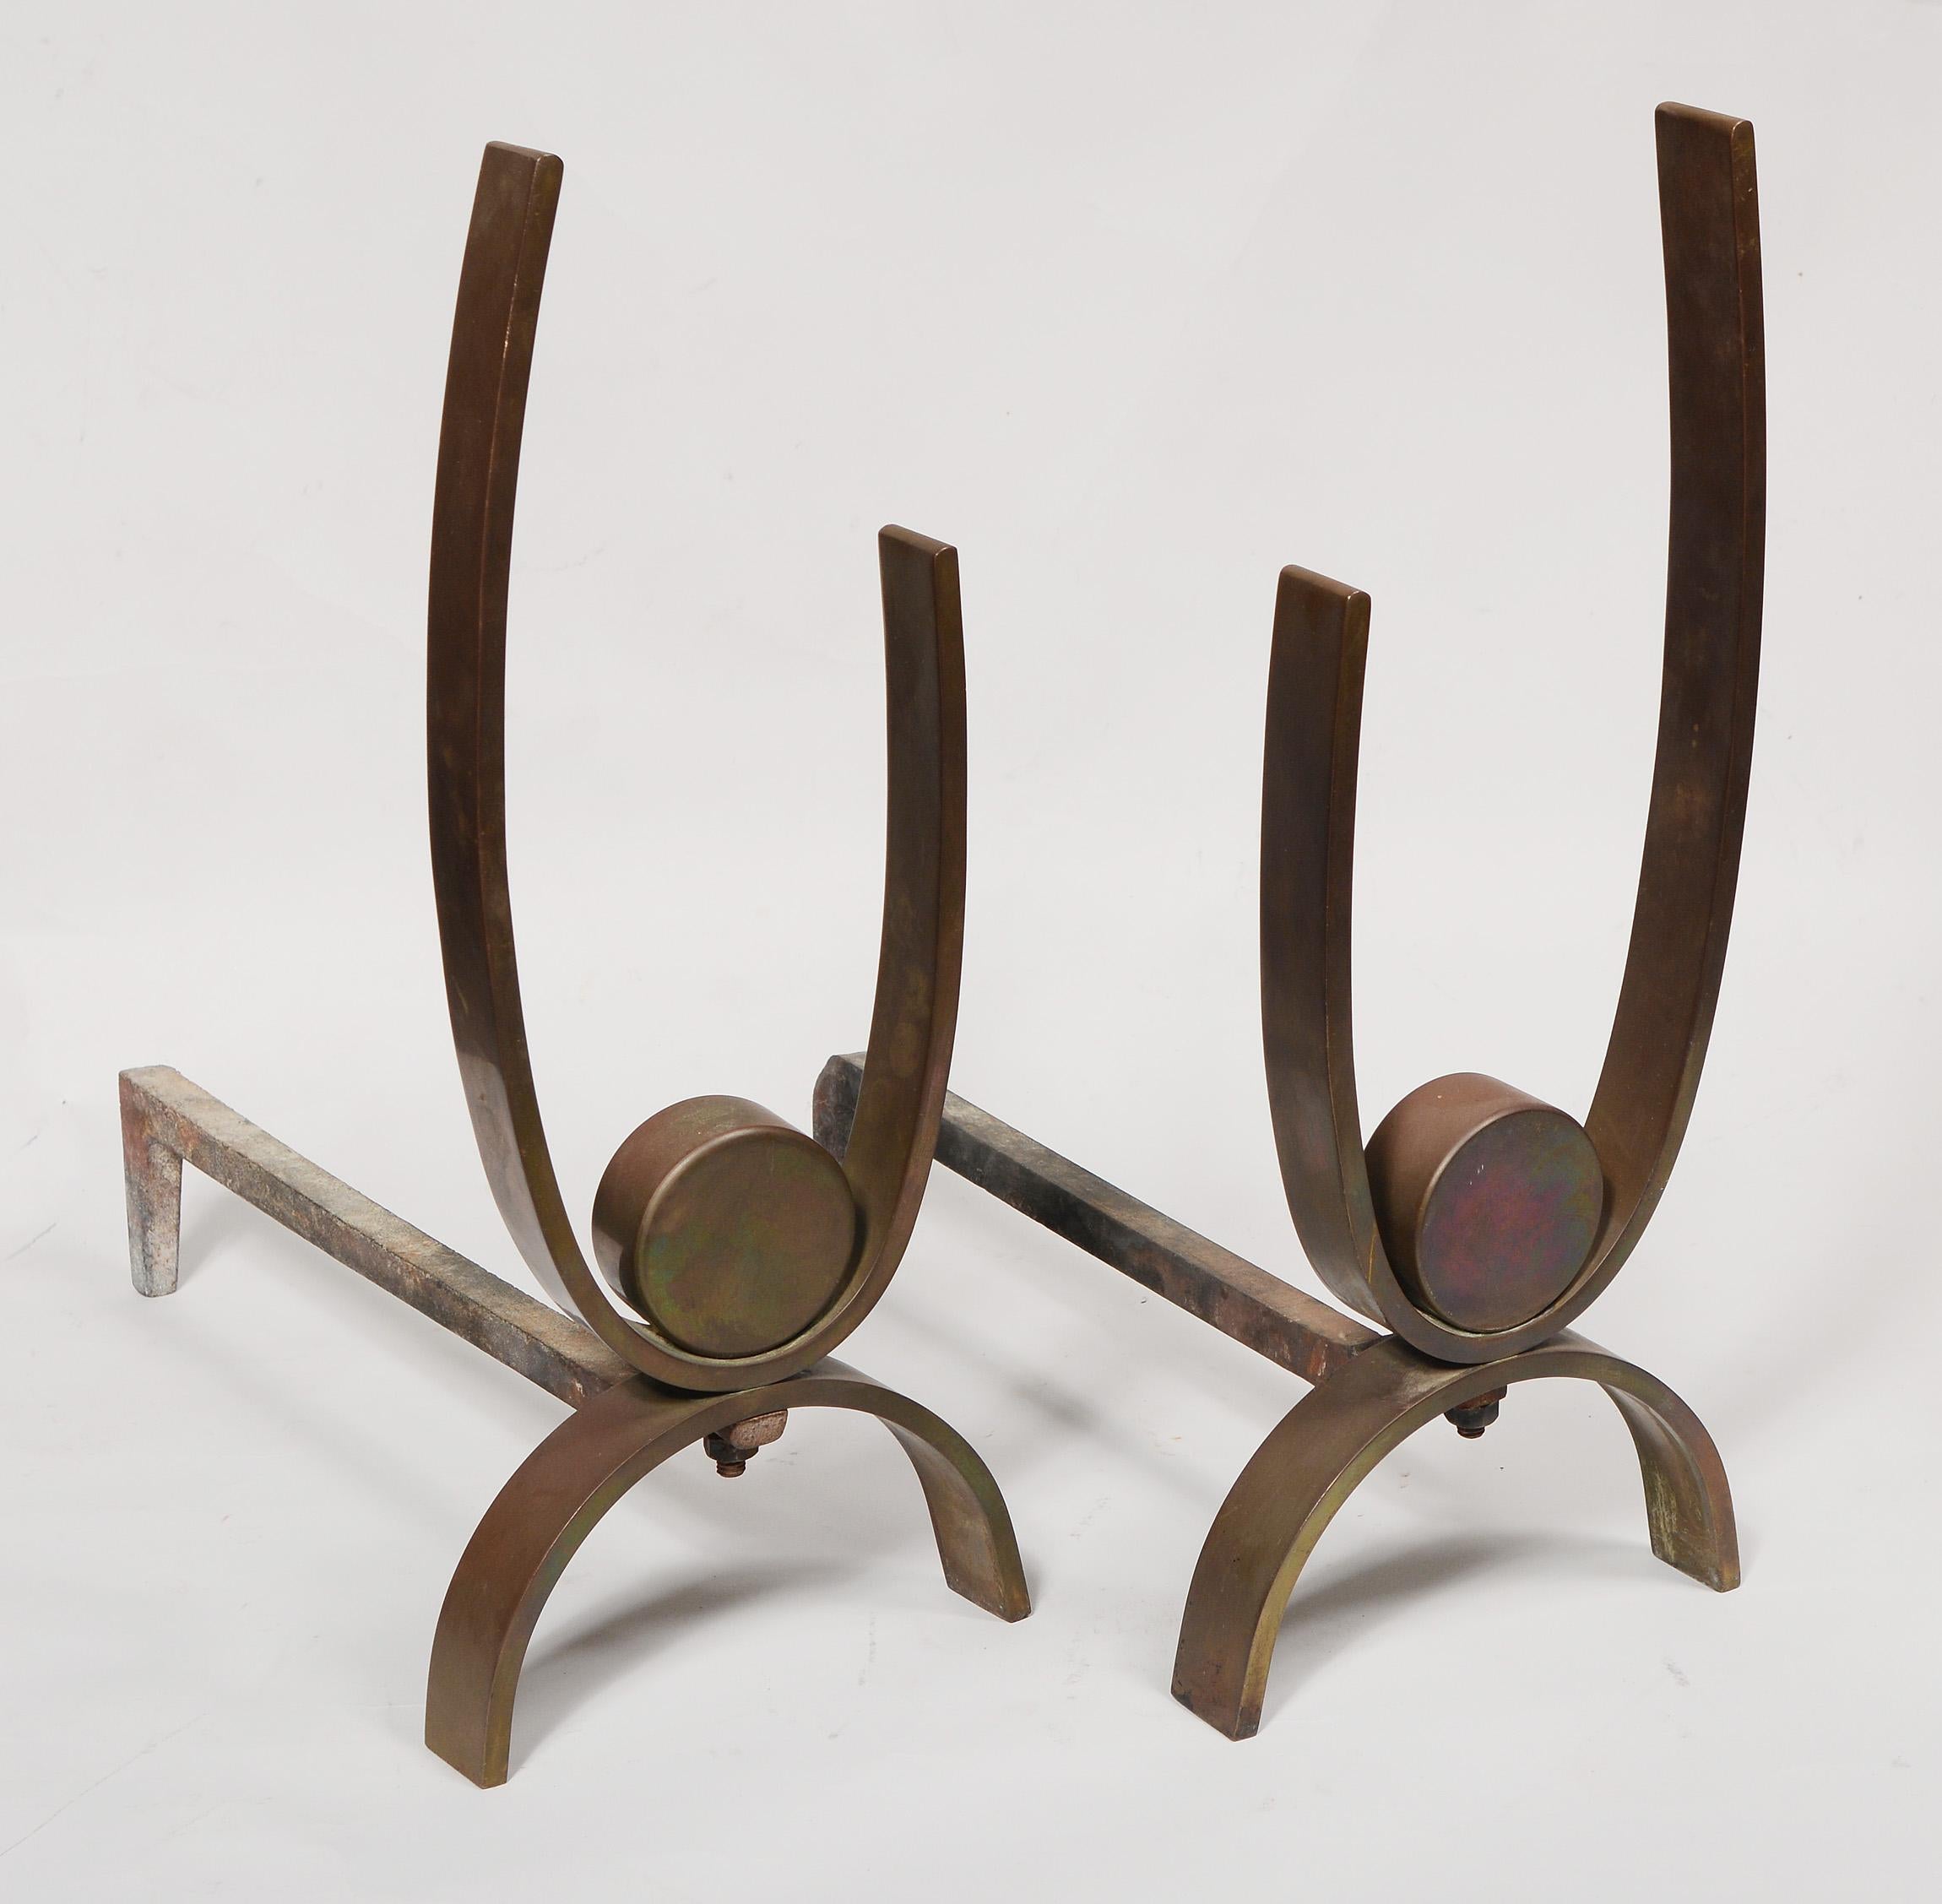 Modernist brass andirons reminiscent of Walter Von Nessen designs. These are the earlier version of this andiron with the disk being solid brass. Later the disk was hollowed out in the back. These have a patina that has developed over many years.